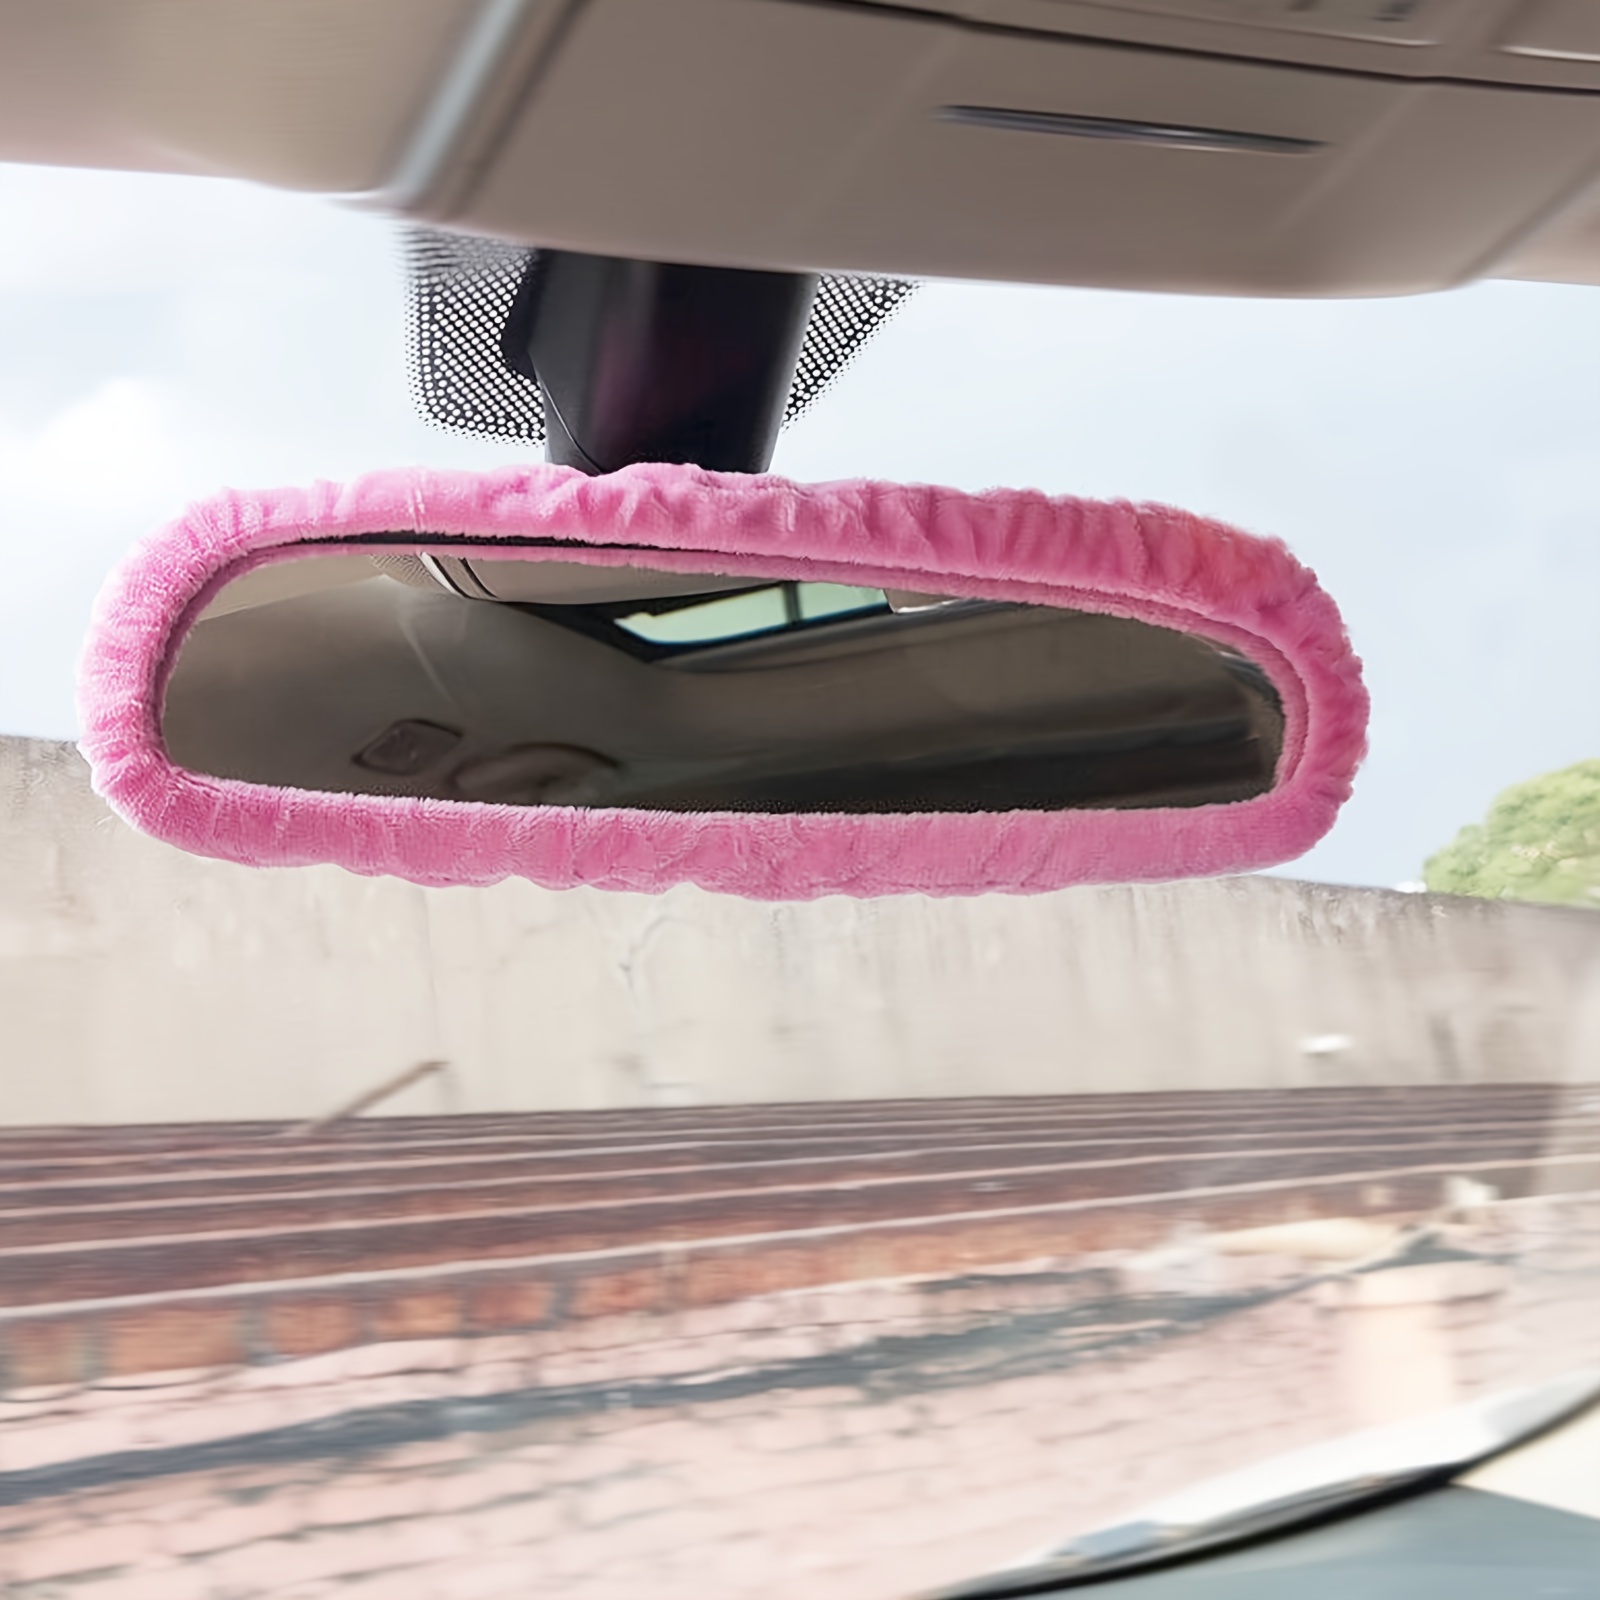 

Add A Pop Of Color To Your Car With This Adorable Peach Plush Rearview Mirror Cover!